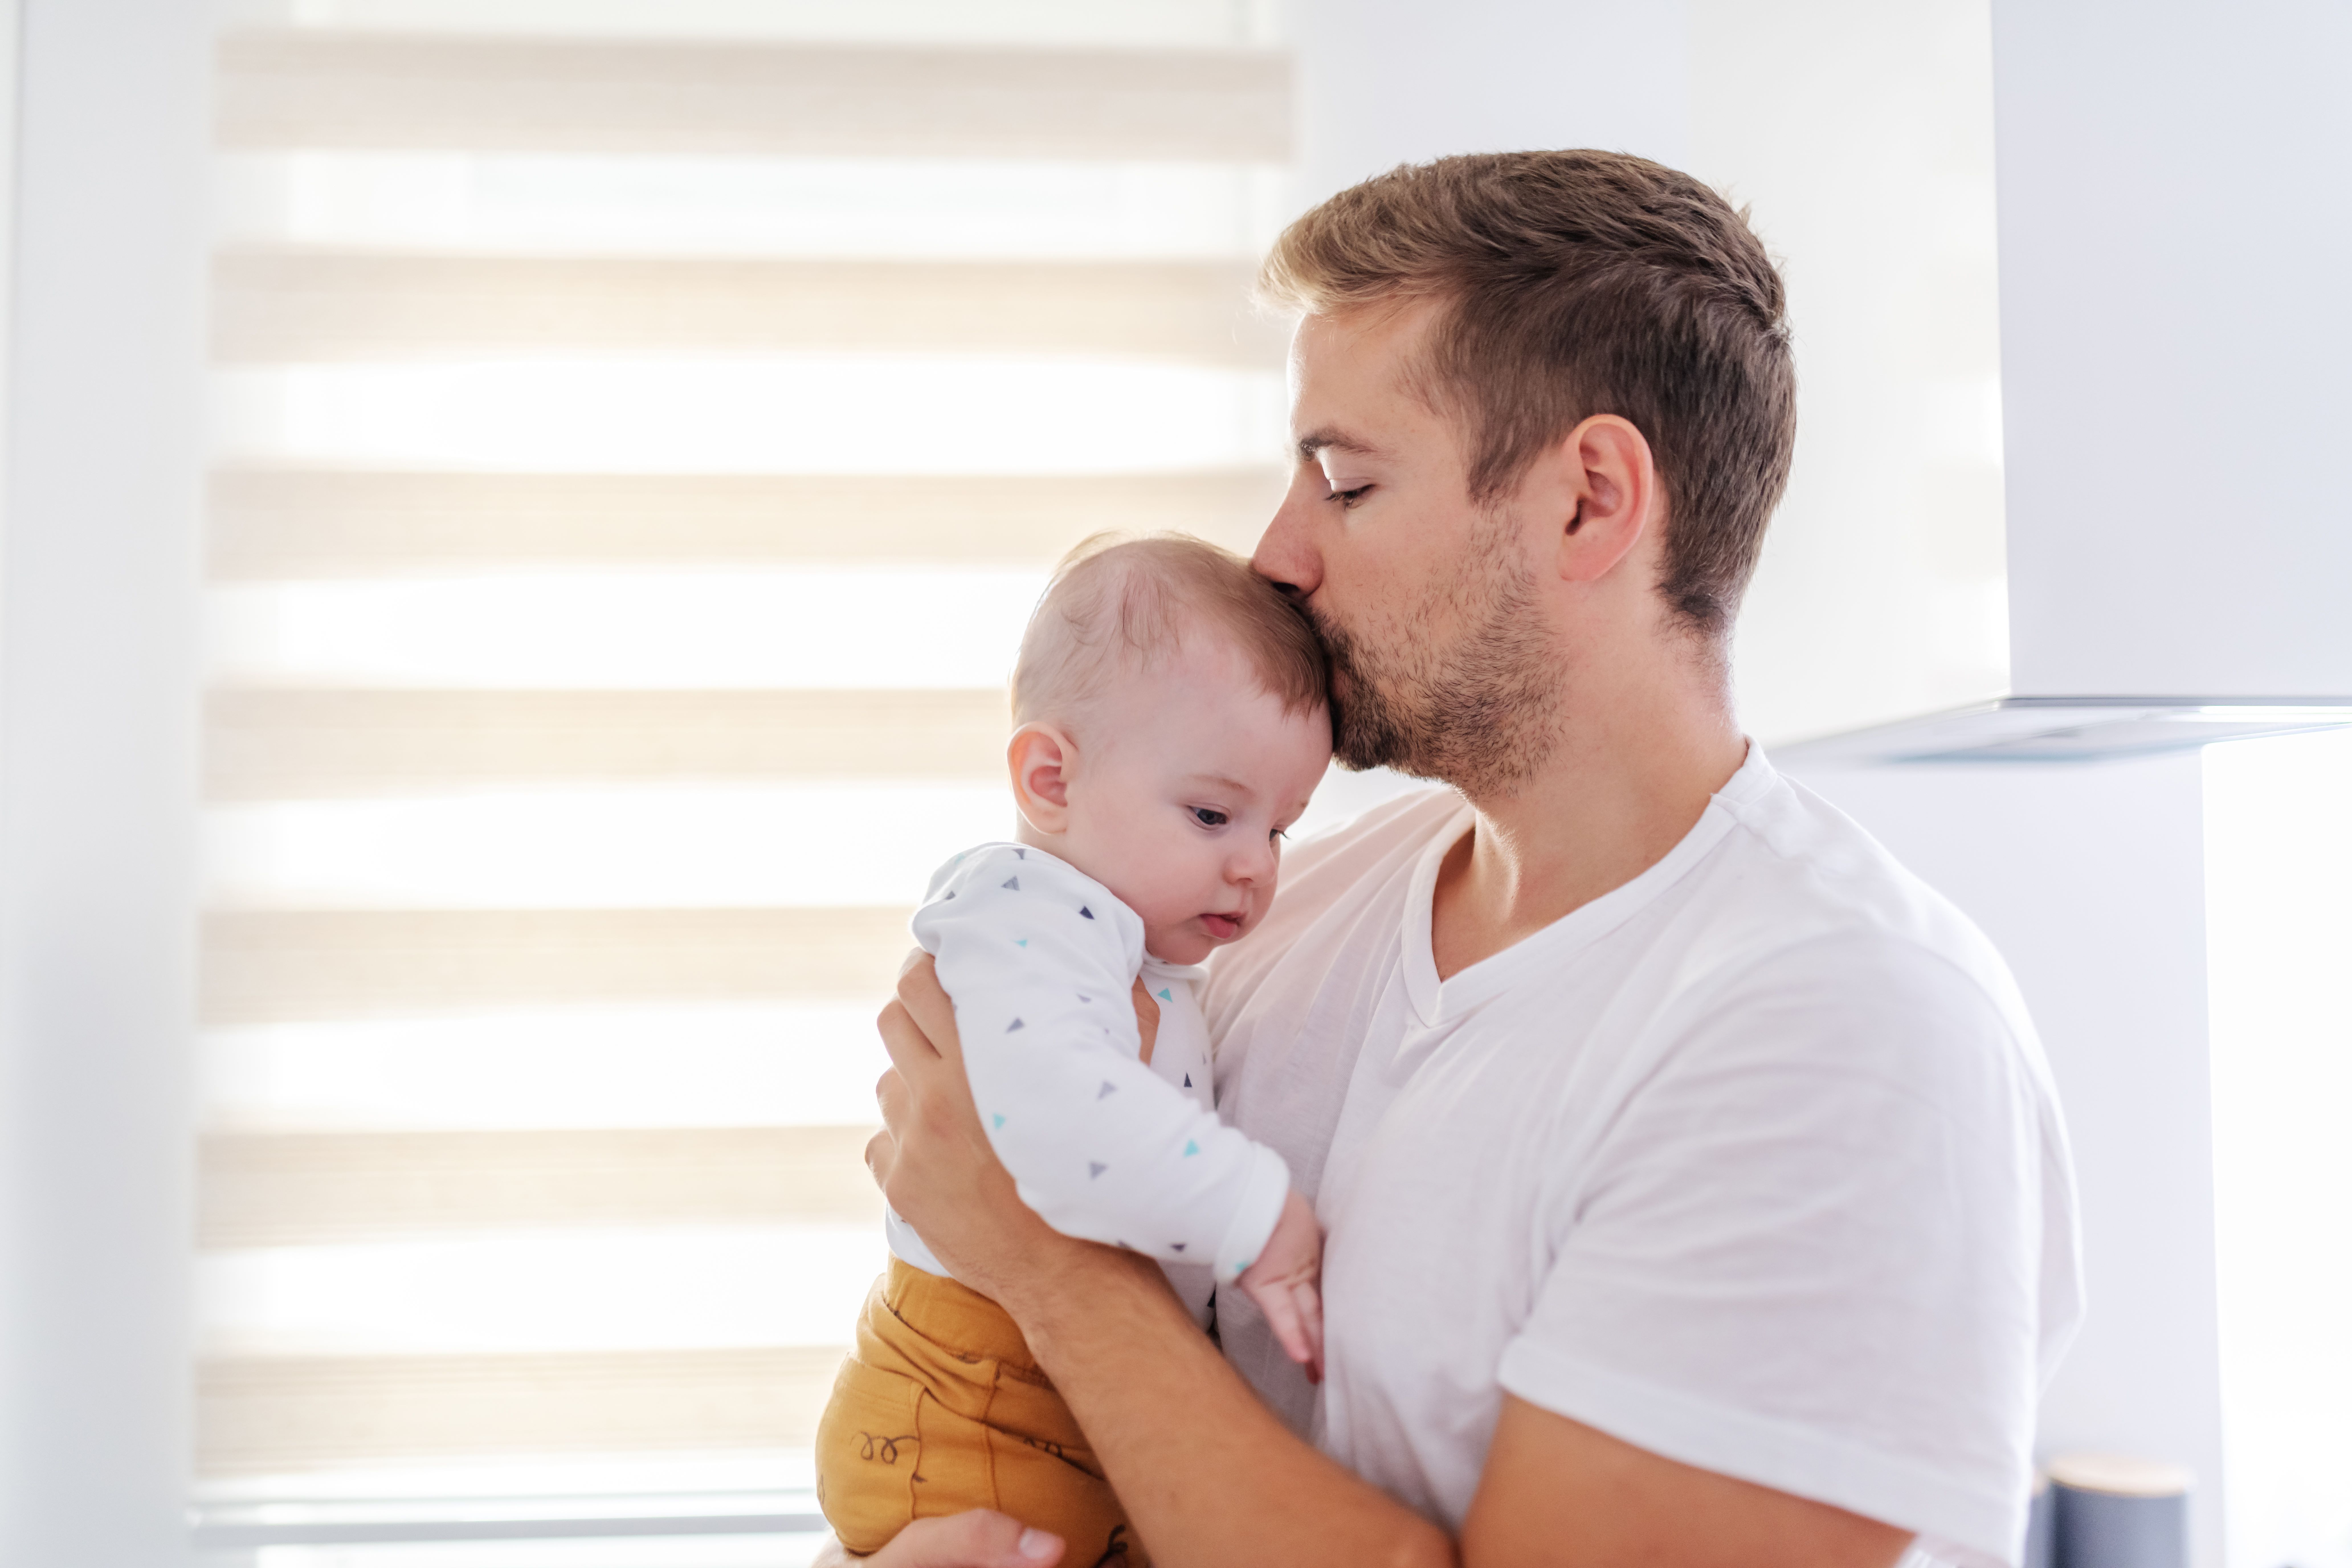 Clearing Up Misconceptions About Vasectomy Reversal for Non-Paternity